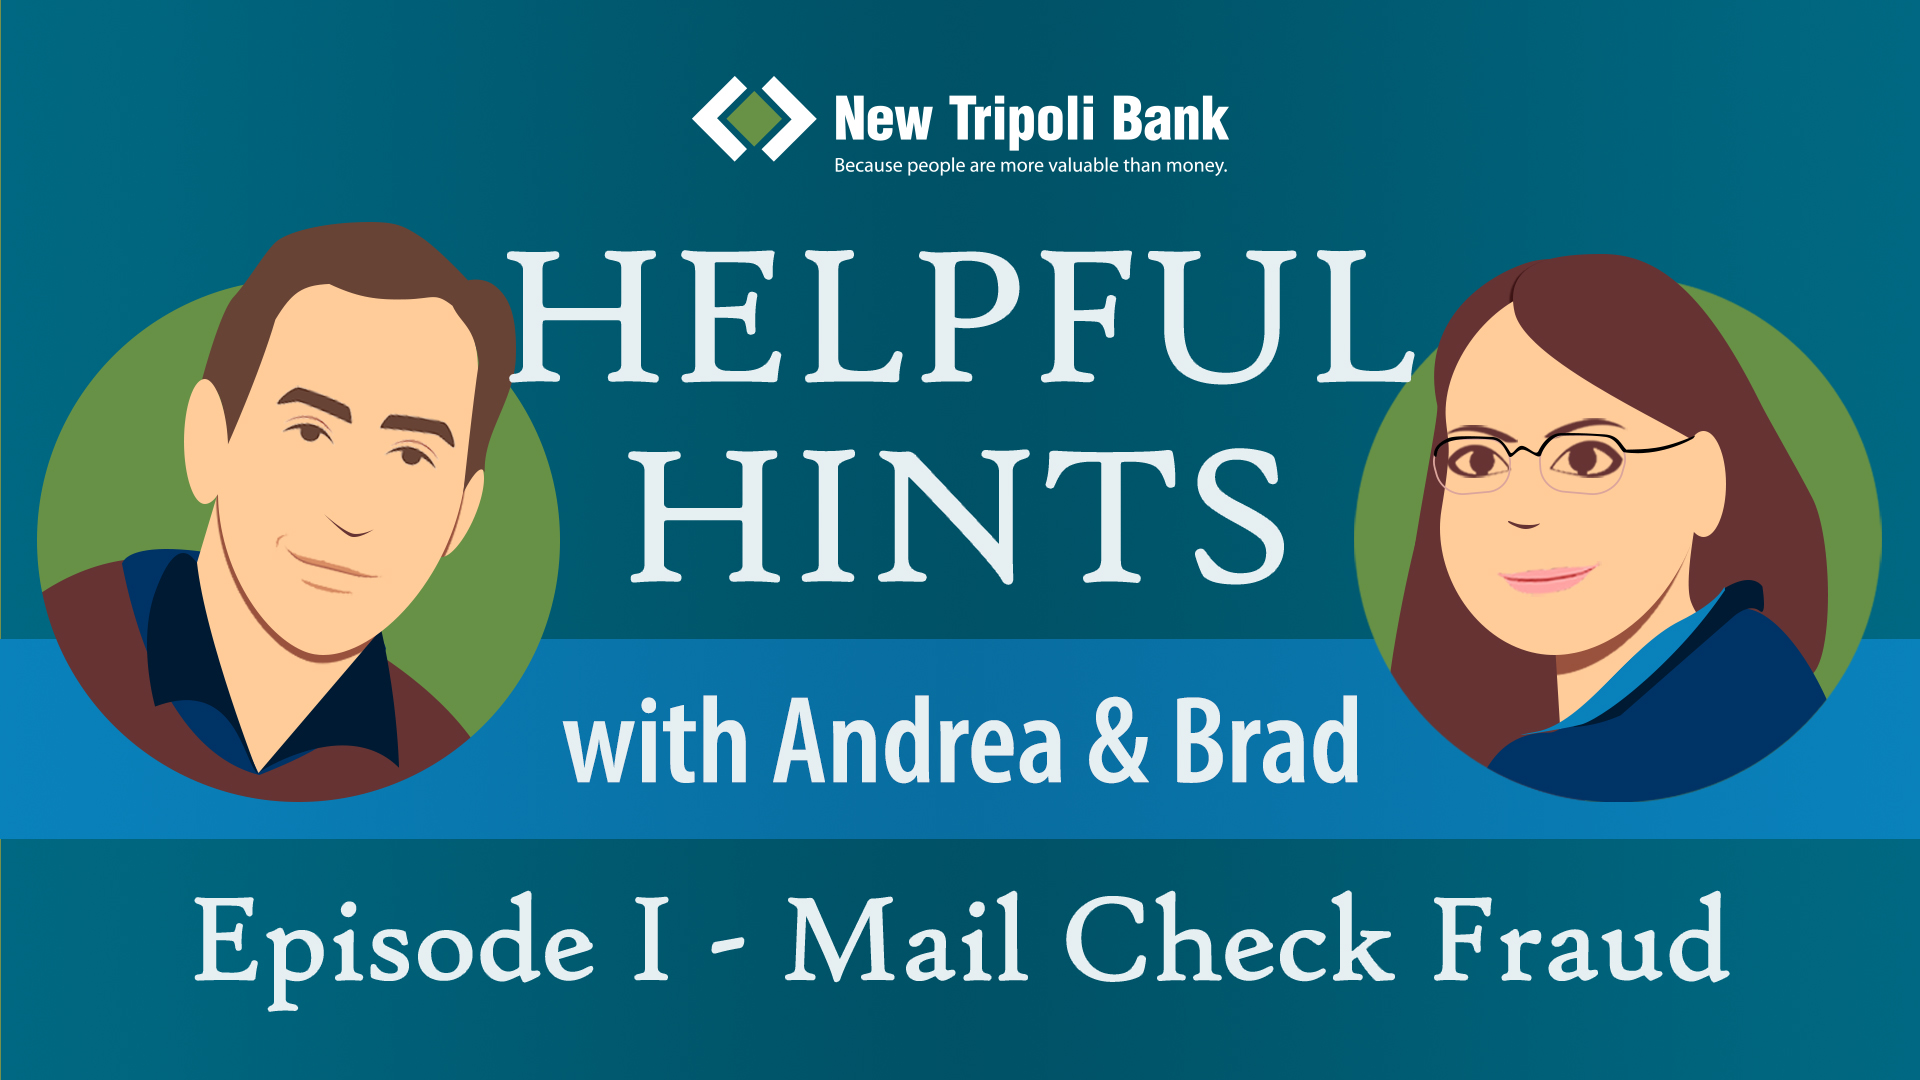 Helpful Hints Mail Check Fraud